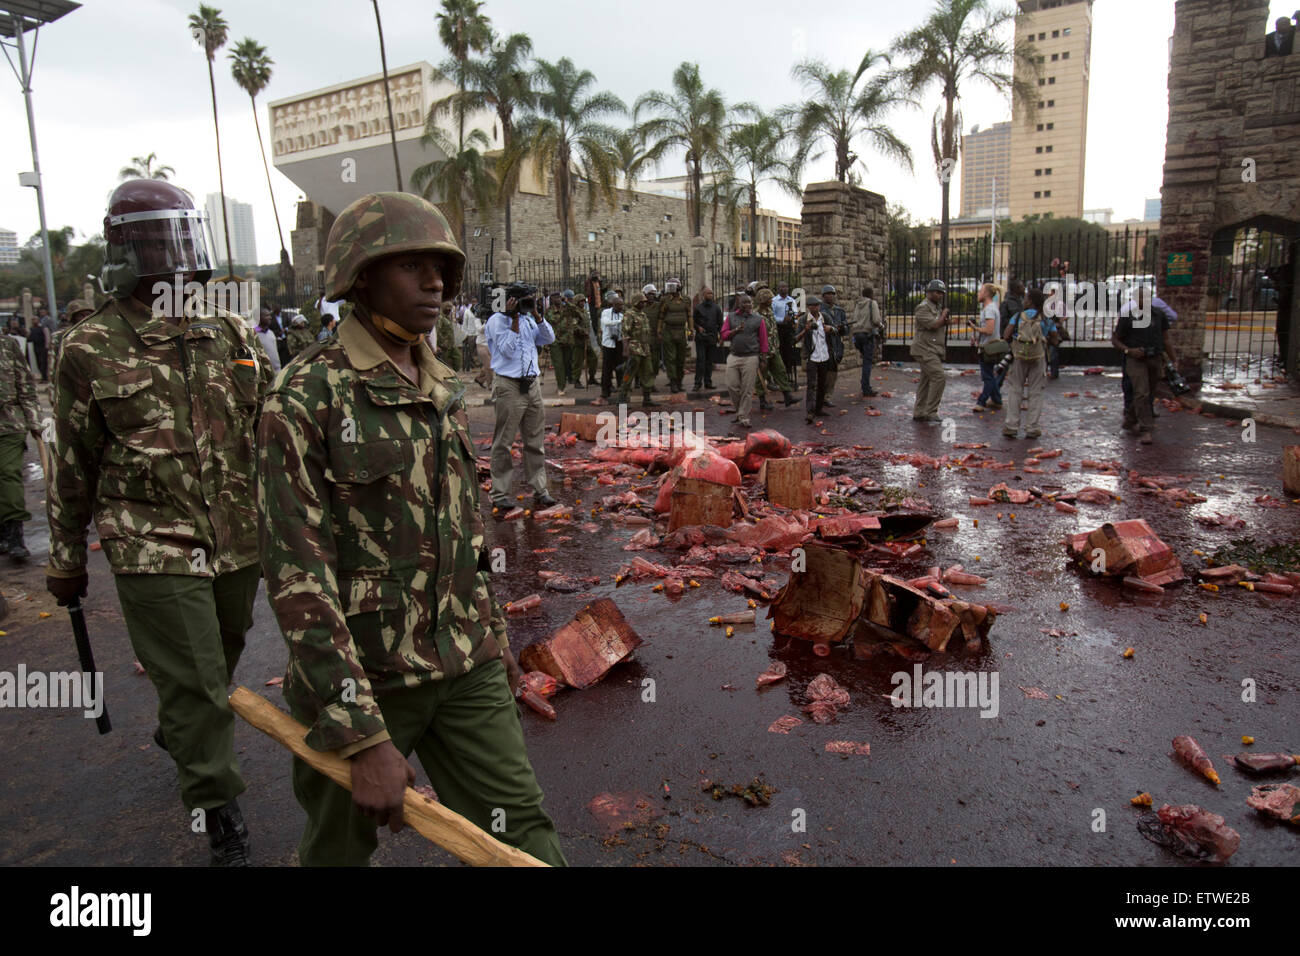 Kenyan police walk outside parliament after protestors covered themselves with animal blood symbolising greed during a protest over Members of Parliaments salaries, 11 June 2013 Kenyan MP's have voted to allow them a pay increase in defiance of proposals to cut pay. Kenyan MP's are already one of the higest paid in the world.The MP's voted  for a monthly salary of about $10,000 (£6,540).KAREL PRINSLOO. Stock Photo